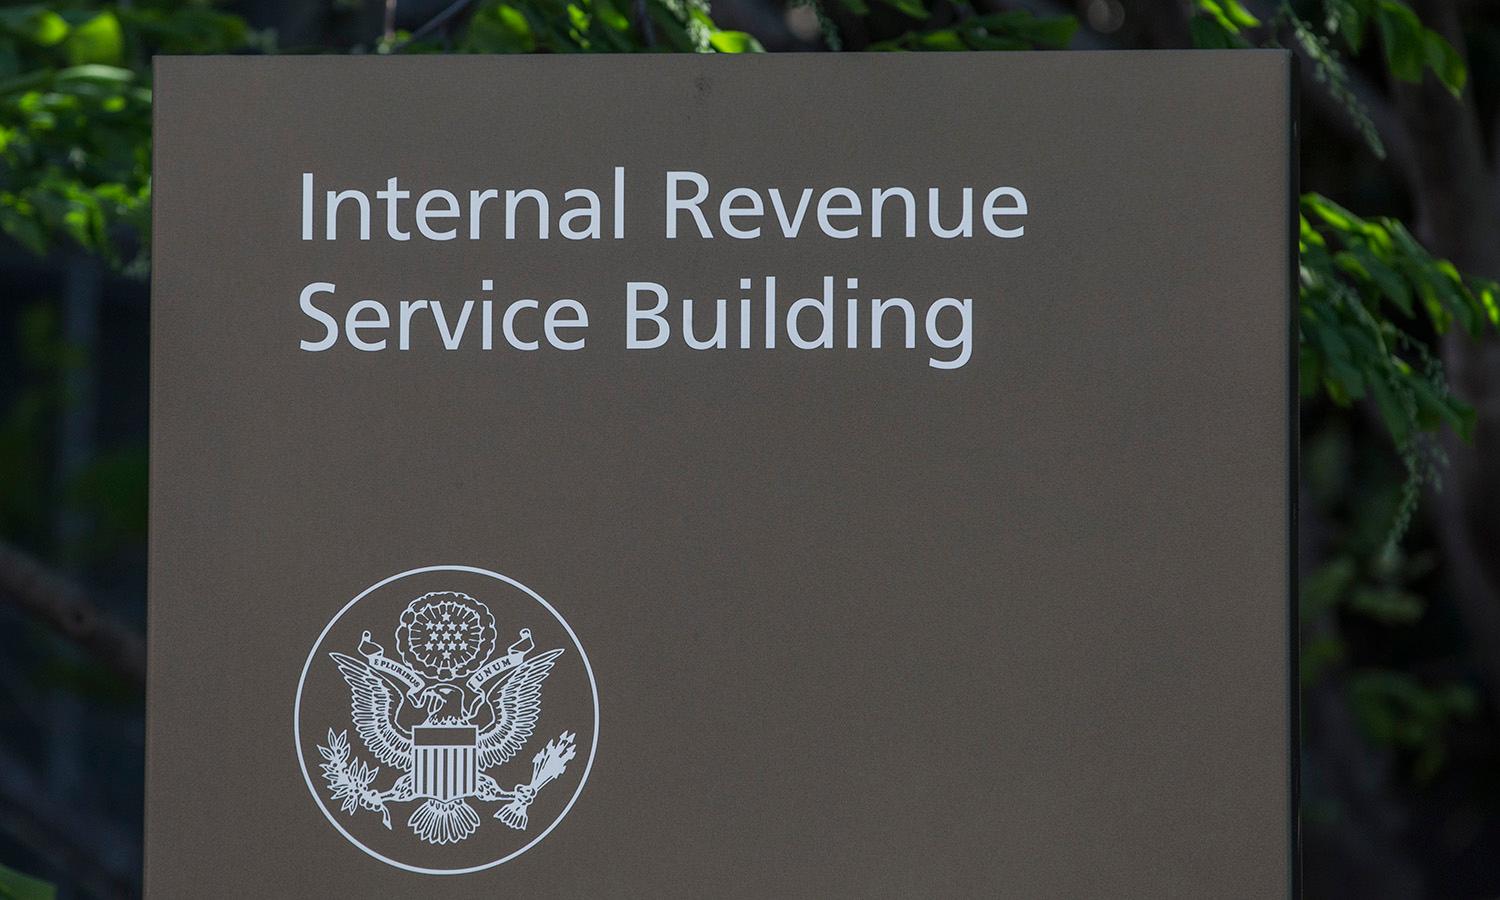 Members of Congress are turning up the heat on the IRS over its planned use of facial recognition for taxpayers seeking to access their IRS.gov accounts. Pictured: The IRS building on April 15, 2019, in Washington. (Photo by Zach Gibson/Getty Images)